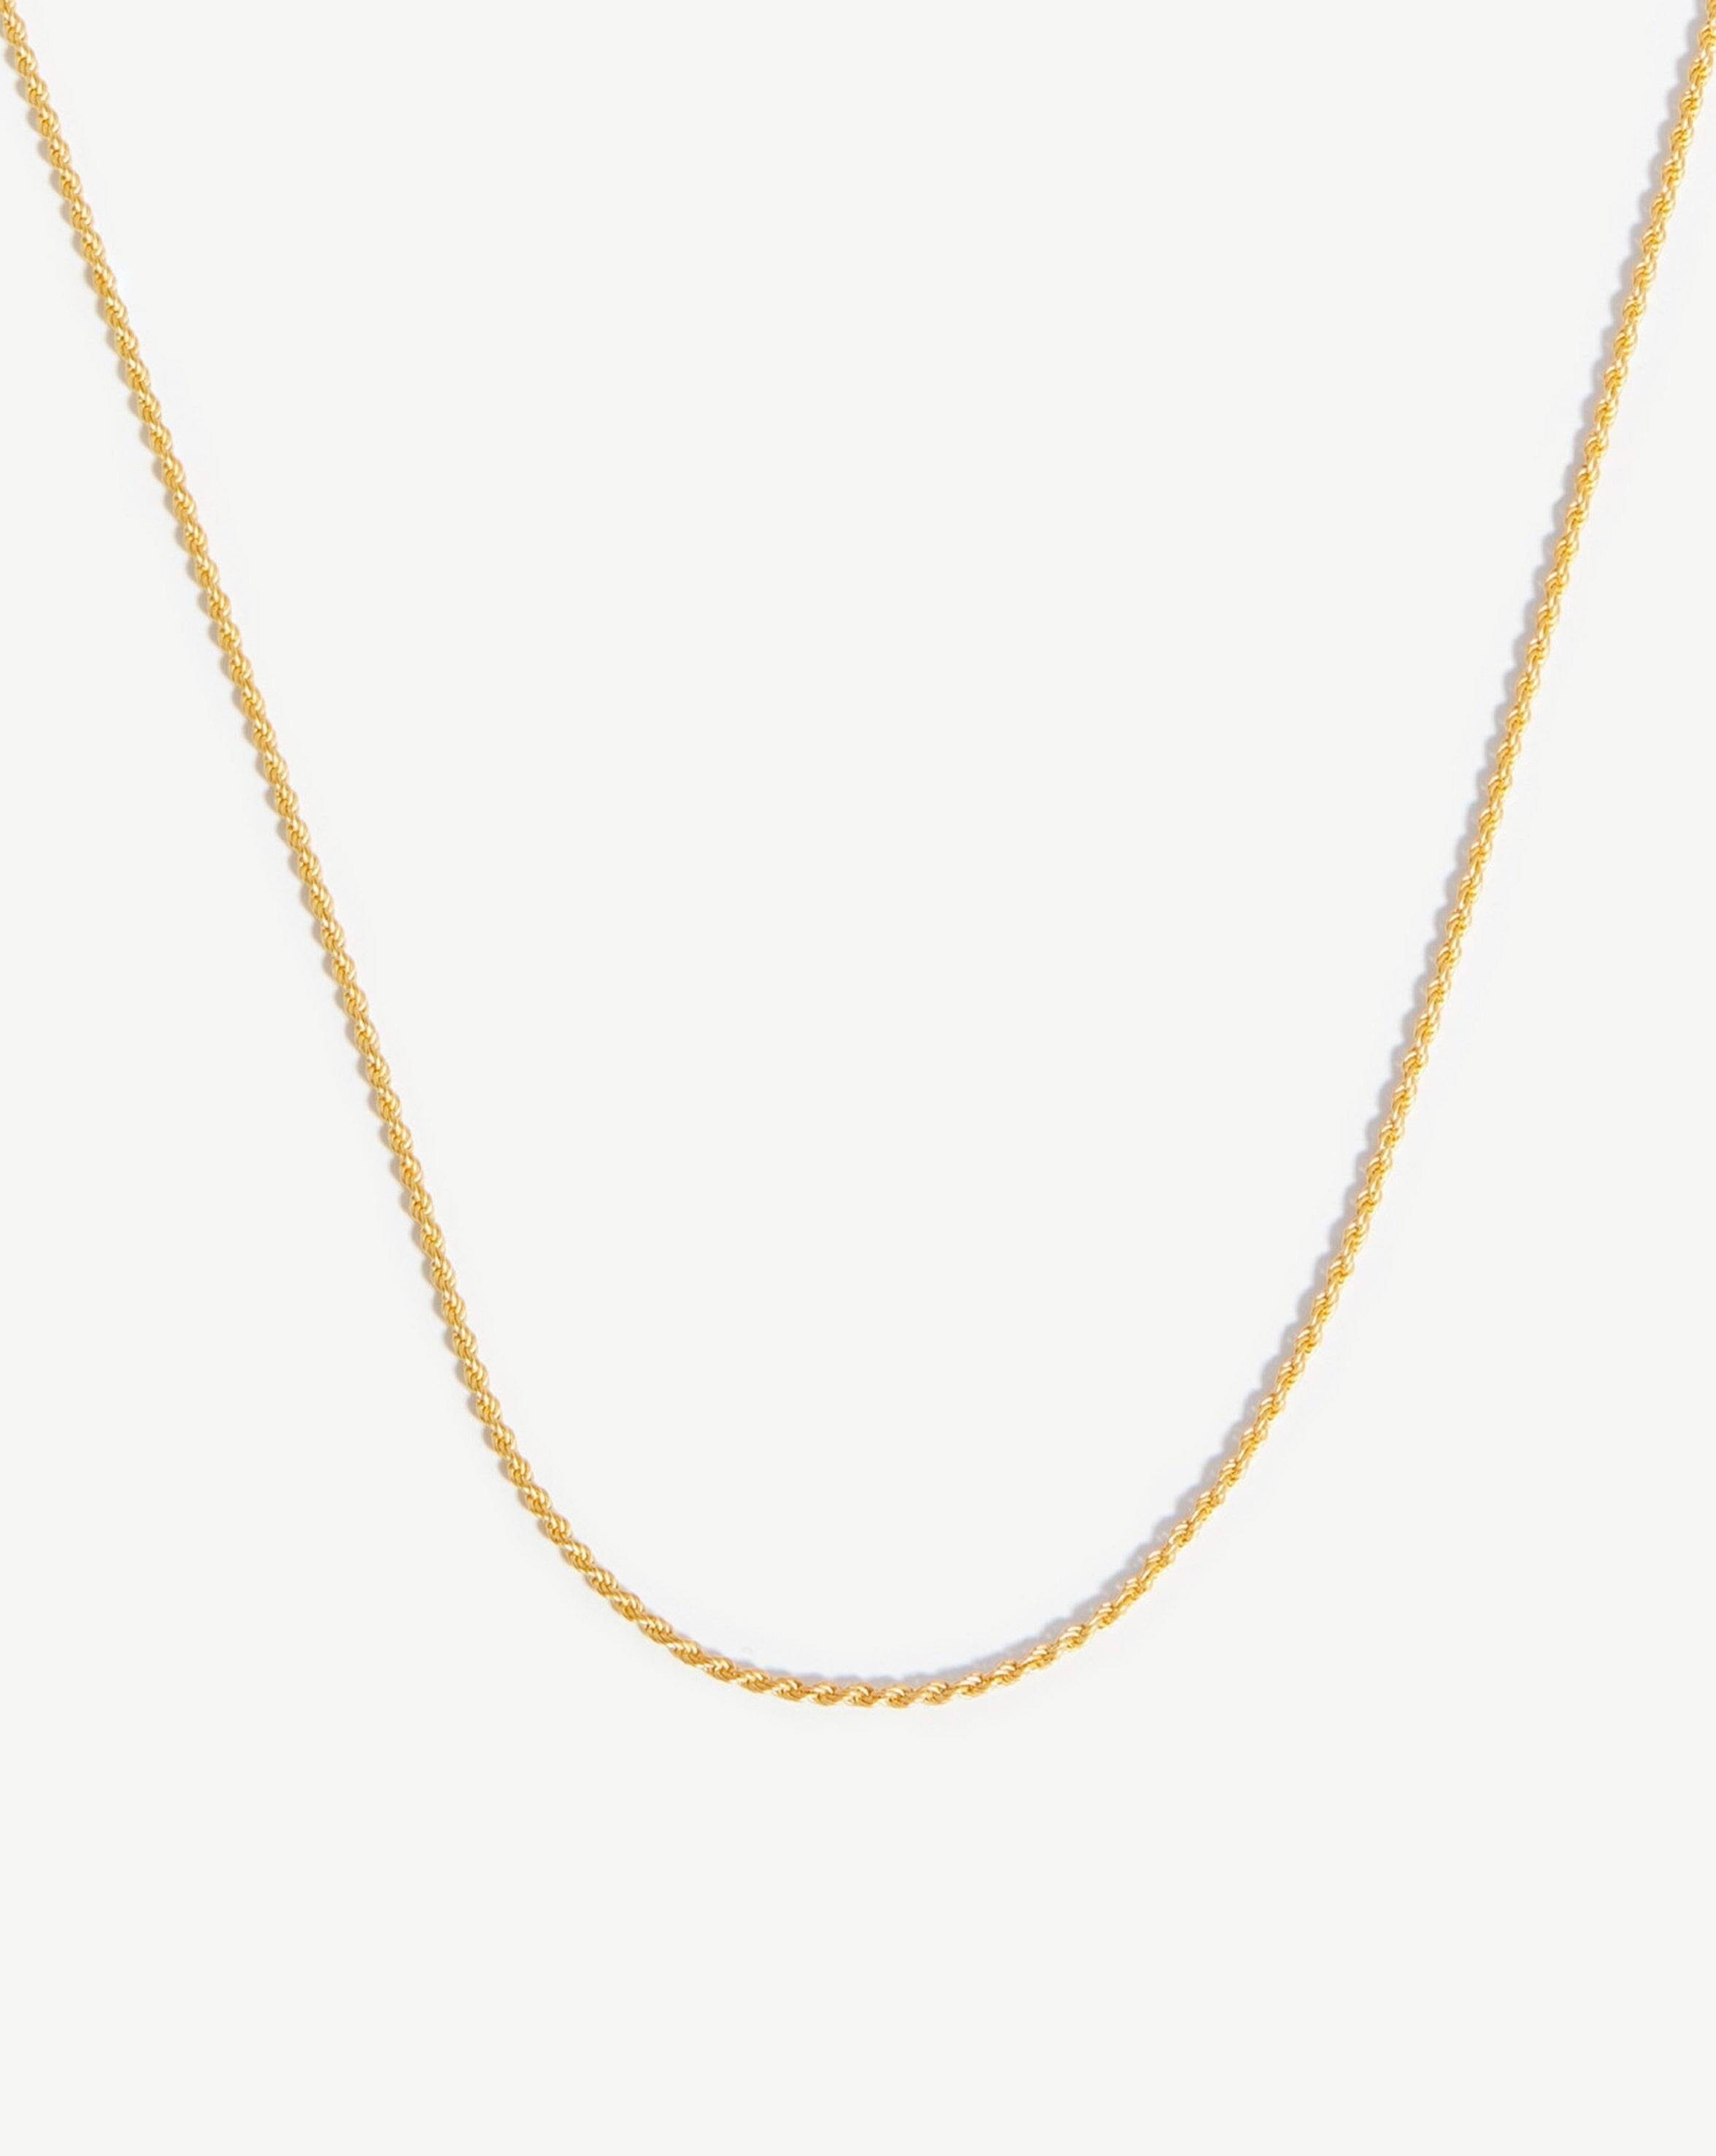 Medium Rope Chain Necklace | 18ct Gold Plated Vermeil